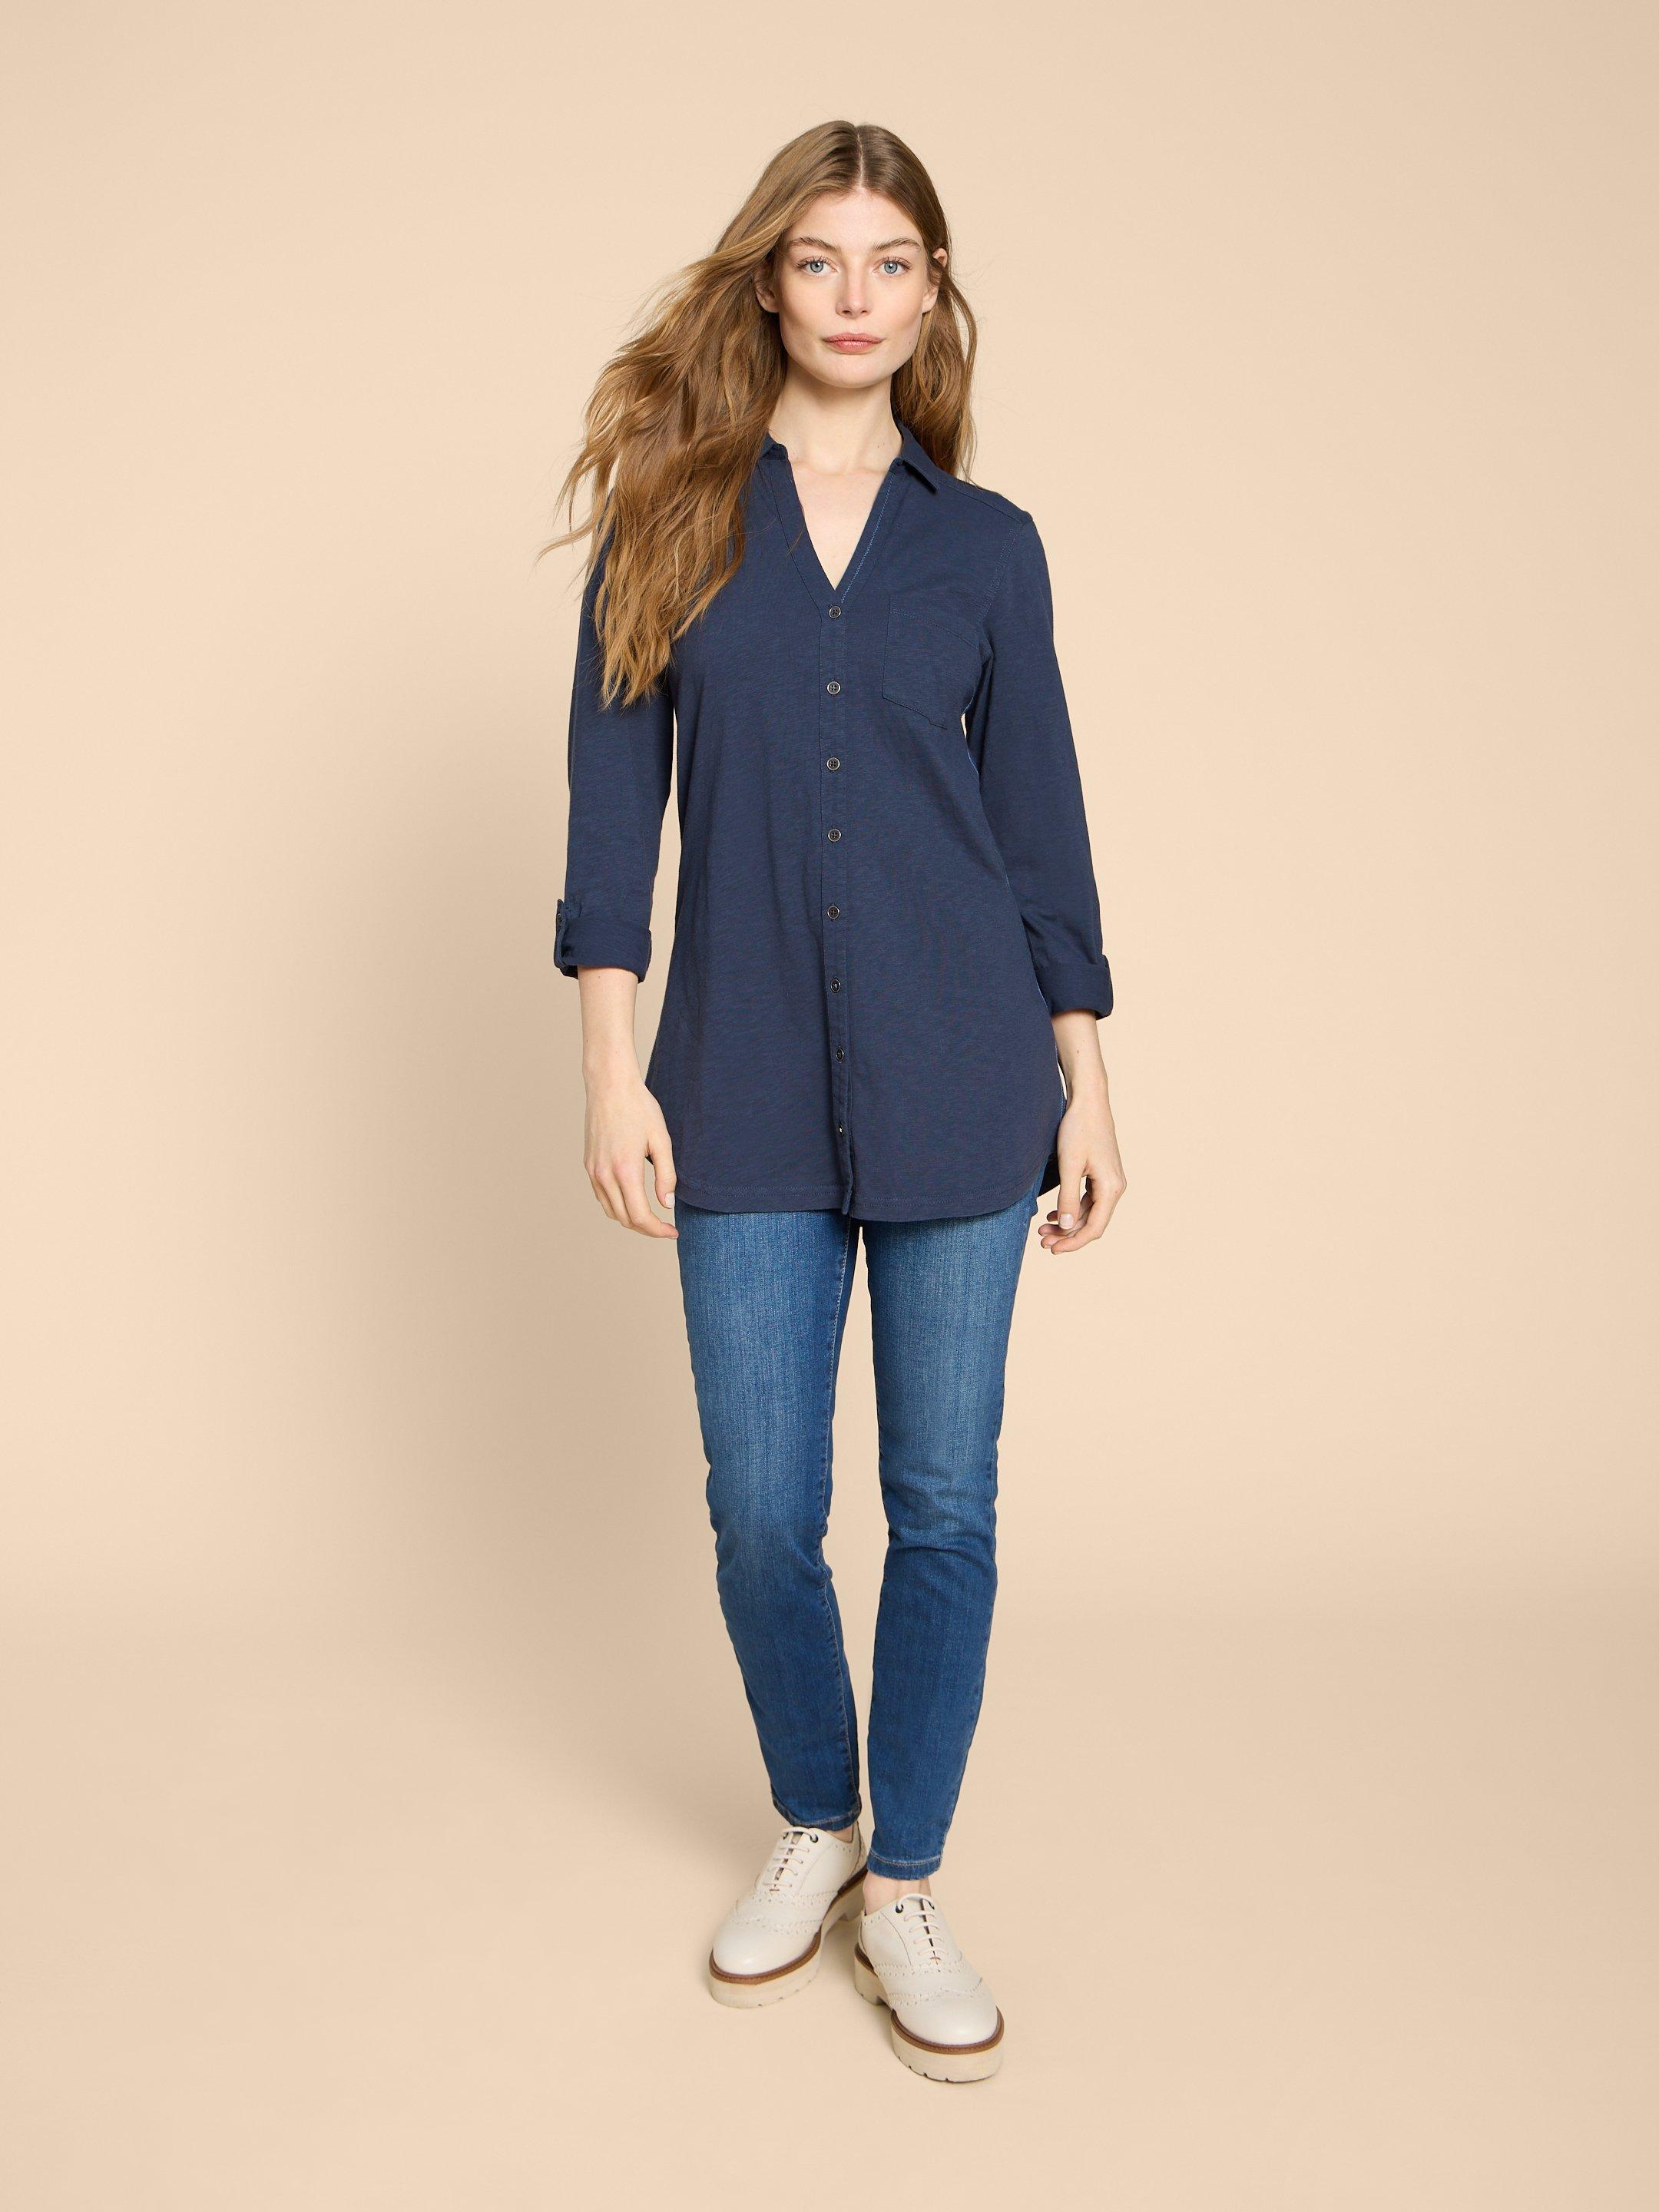 ANNIE LONGLINE SHIRT in FR NAVY - MODEL FRONT